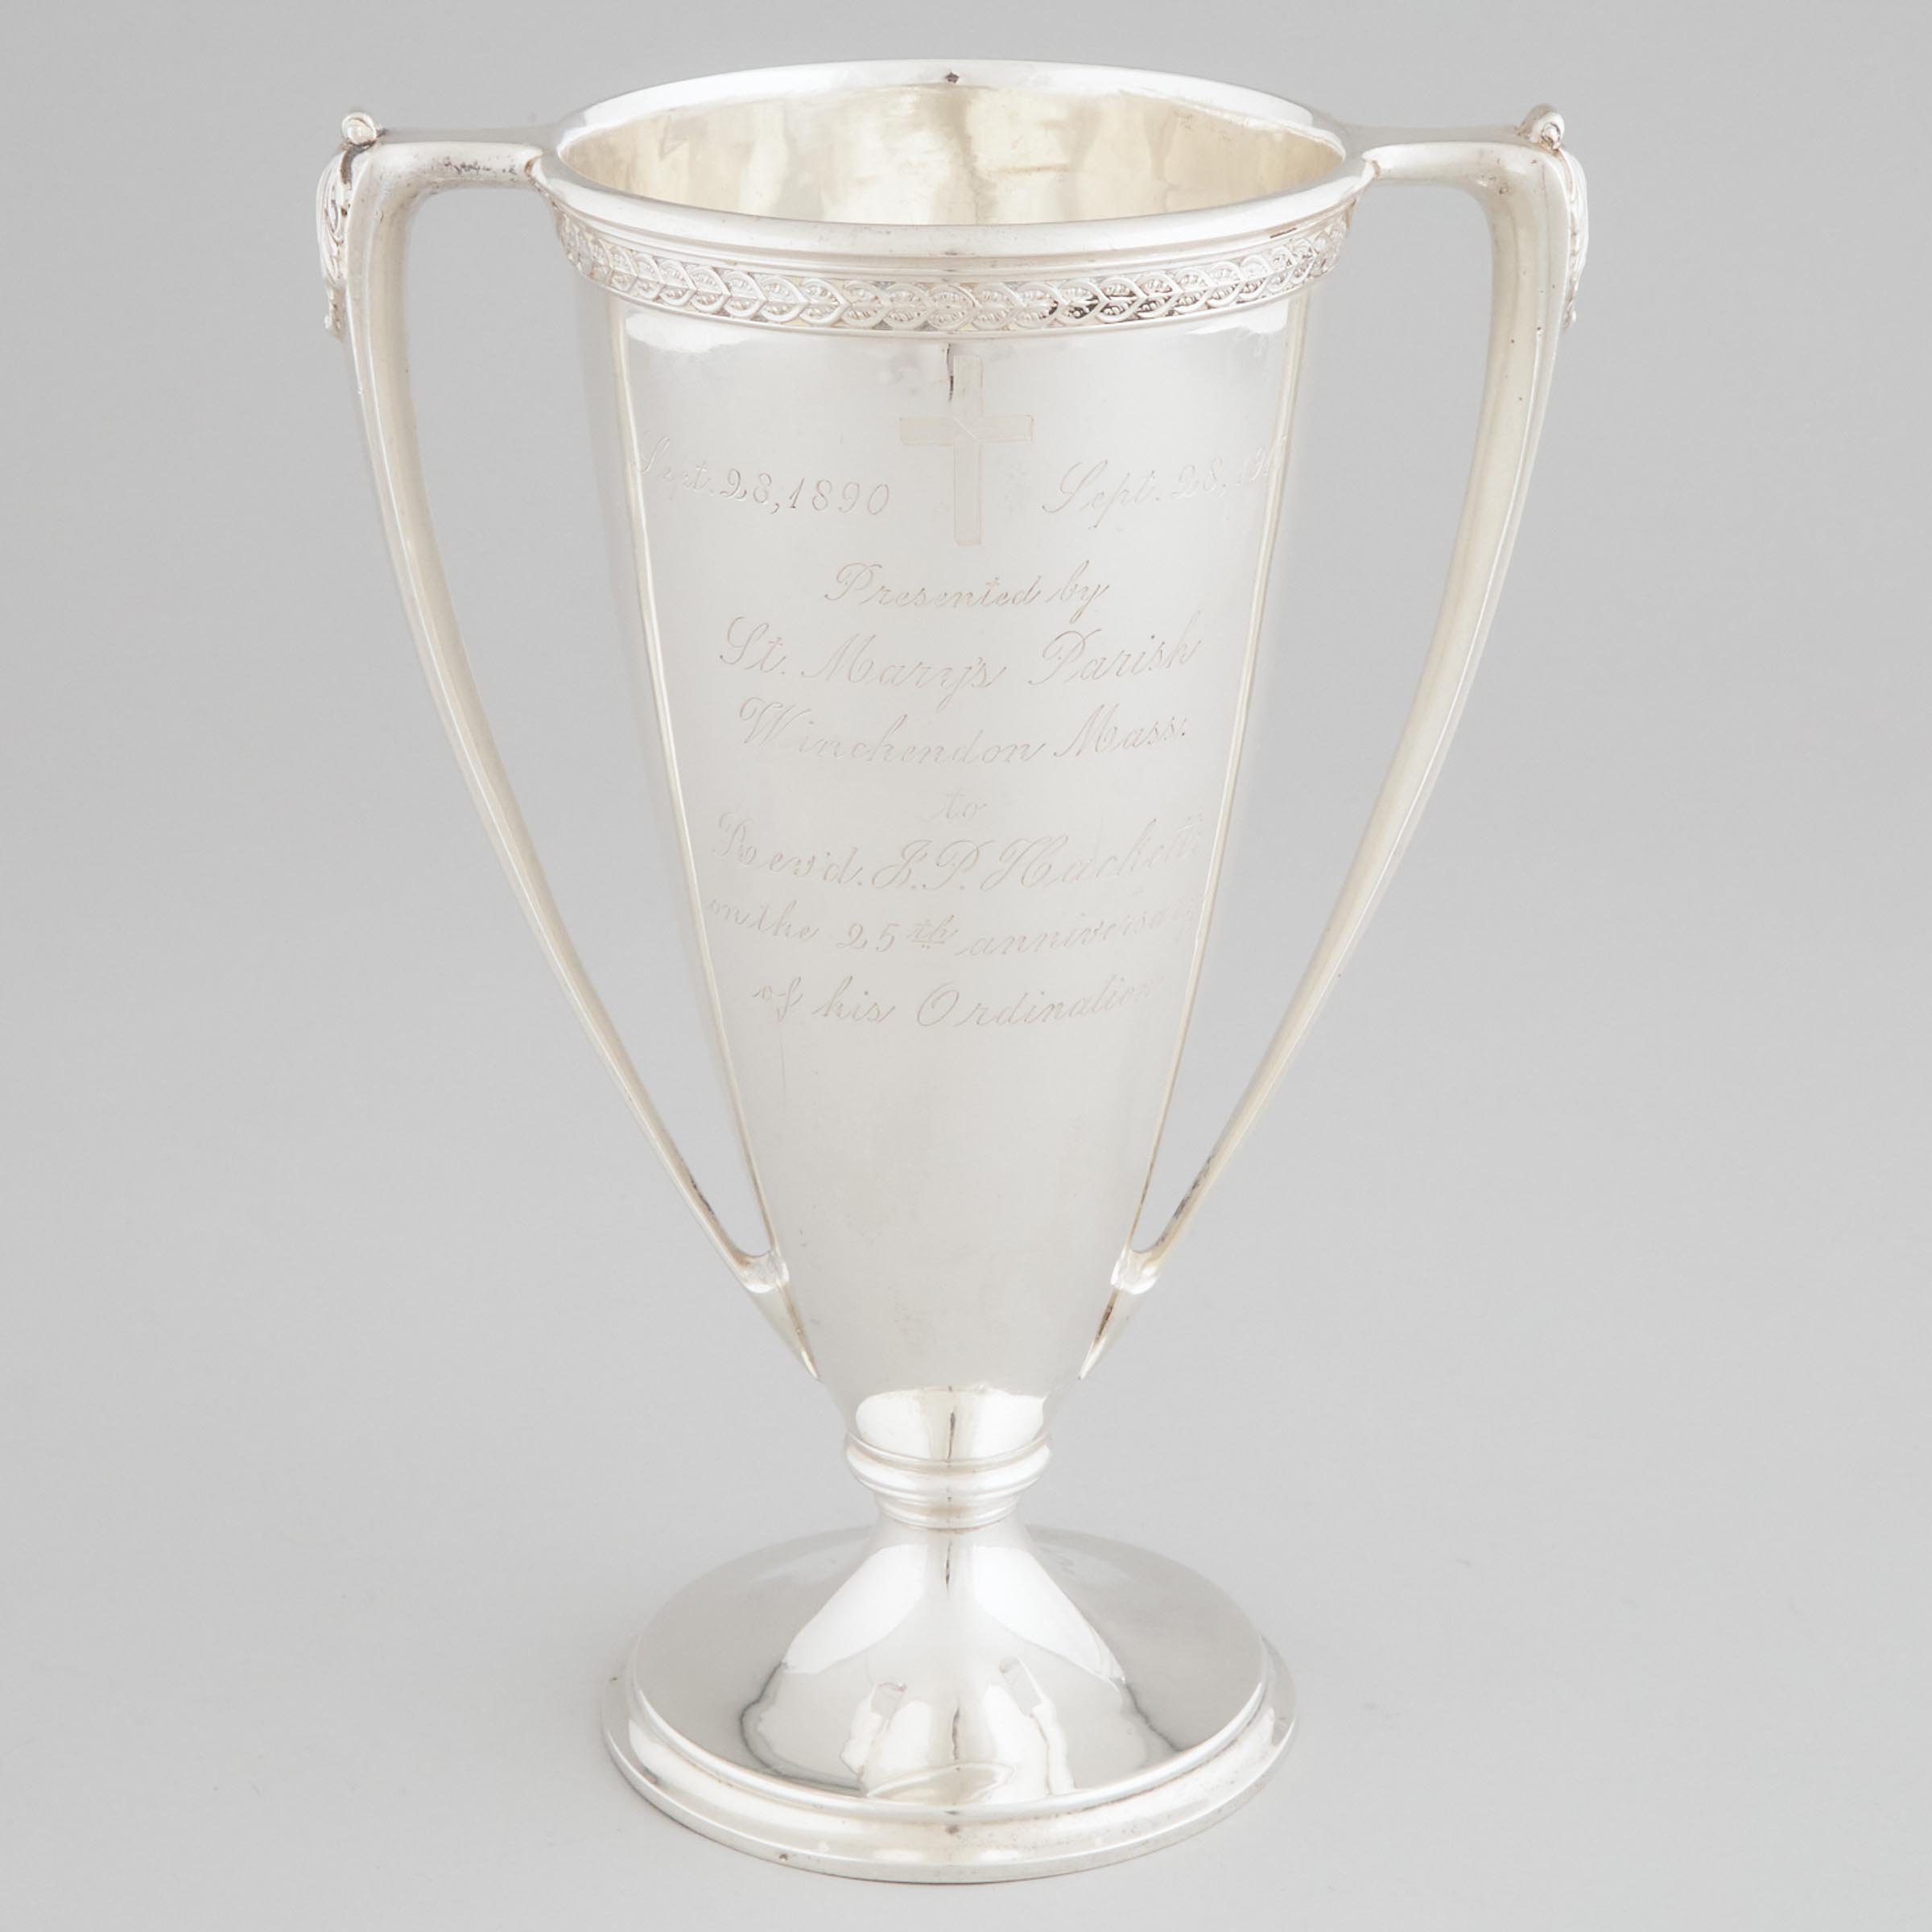 American Silver Two-Handled Cup, Frank W. Smith Silver Co., Gardner, Mass., c.1915